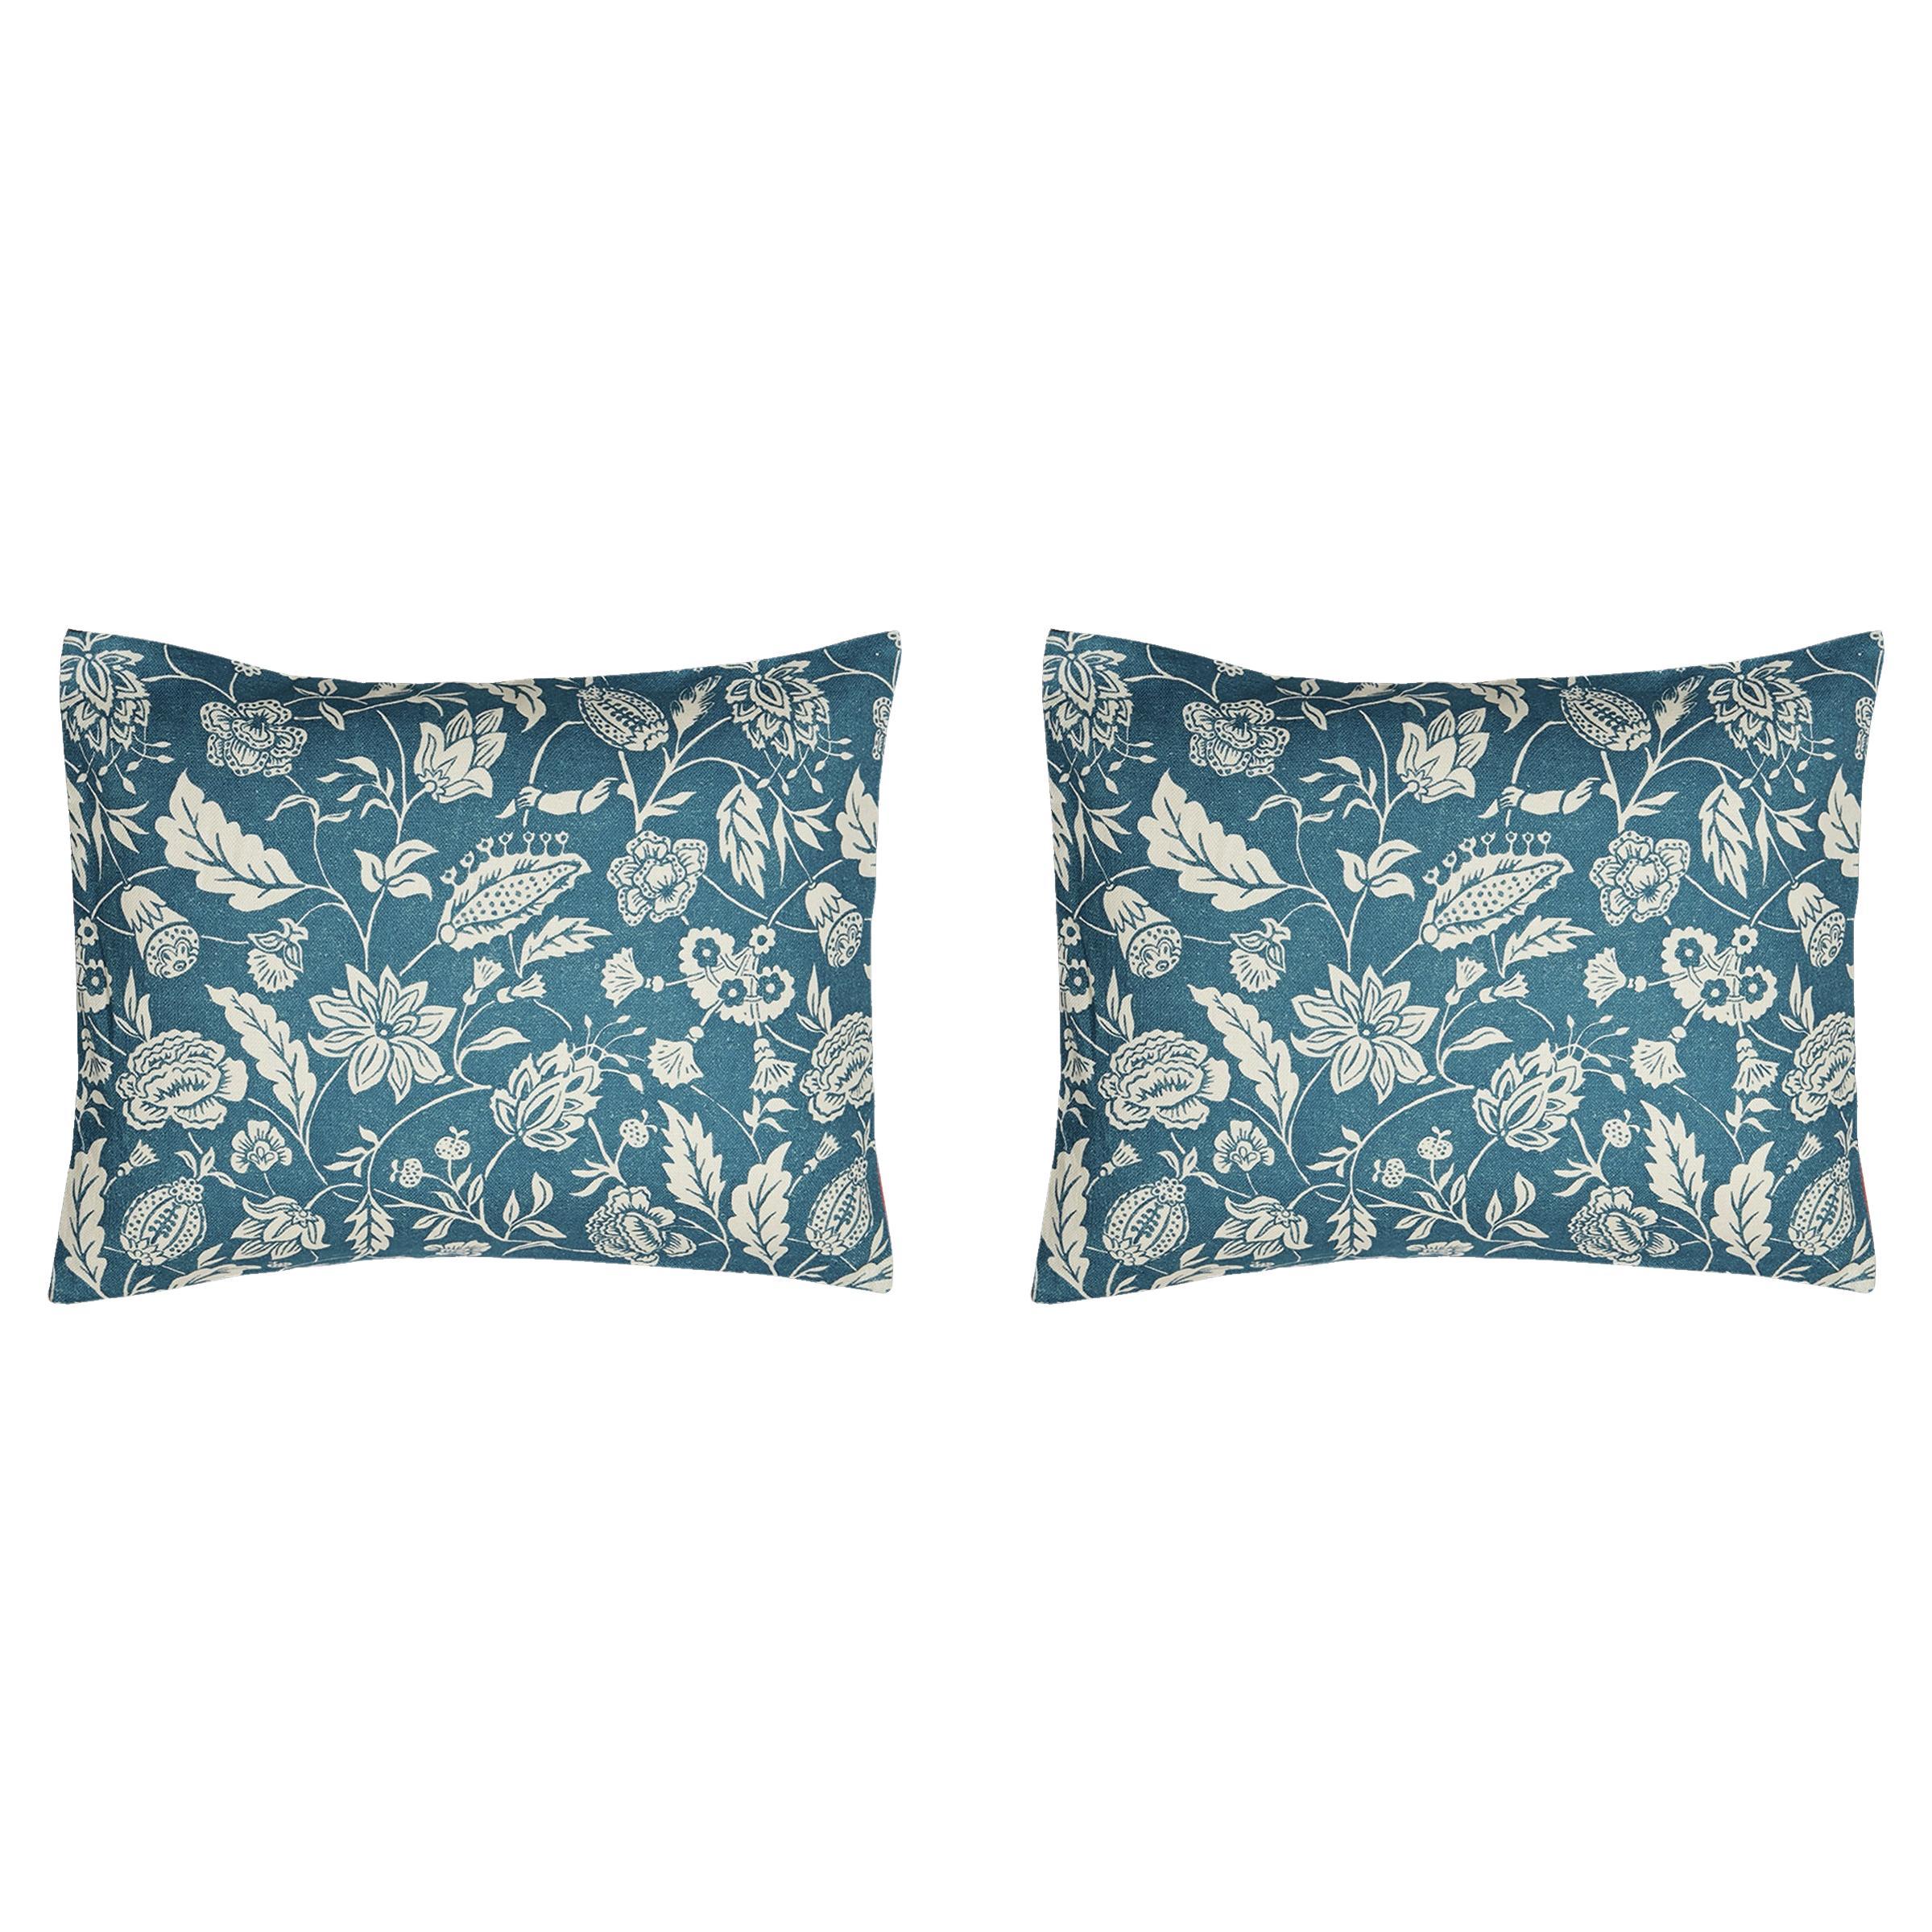 Pair of 12 x 16 Linen Pillows - Grey Blue Indienne pattern - Made in Paris For Sale